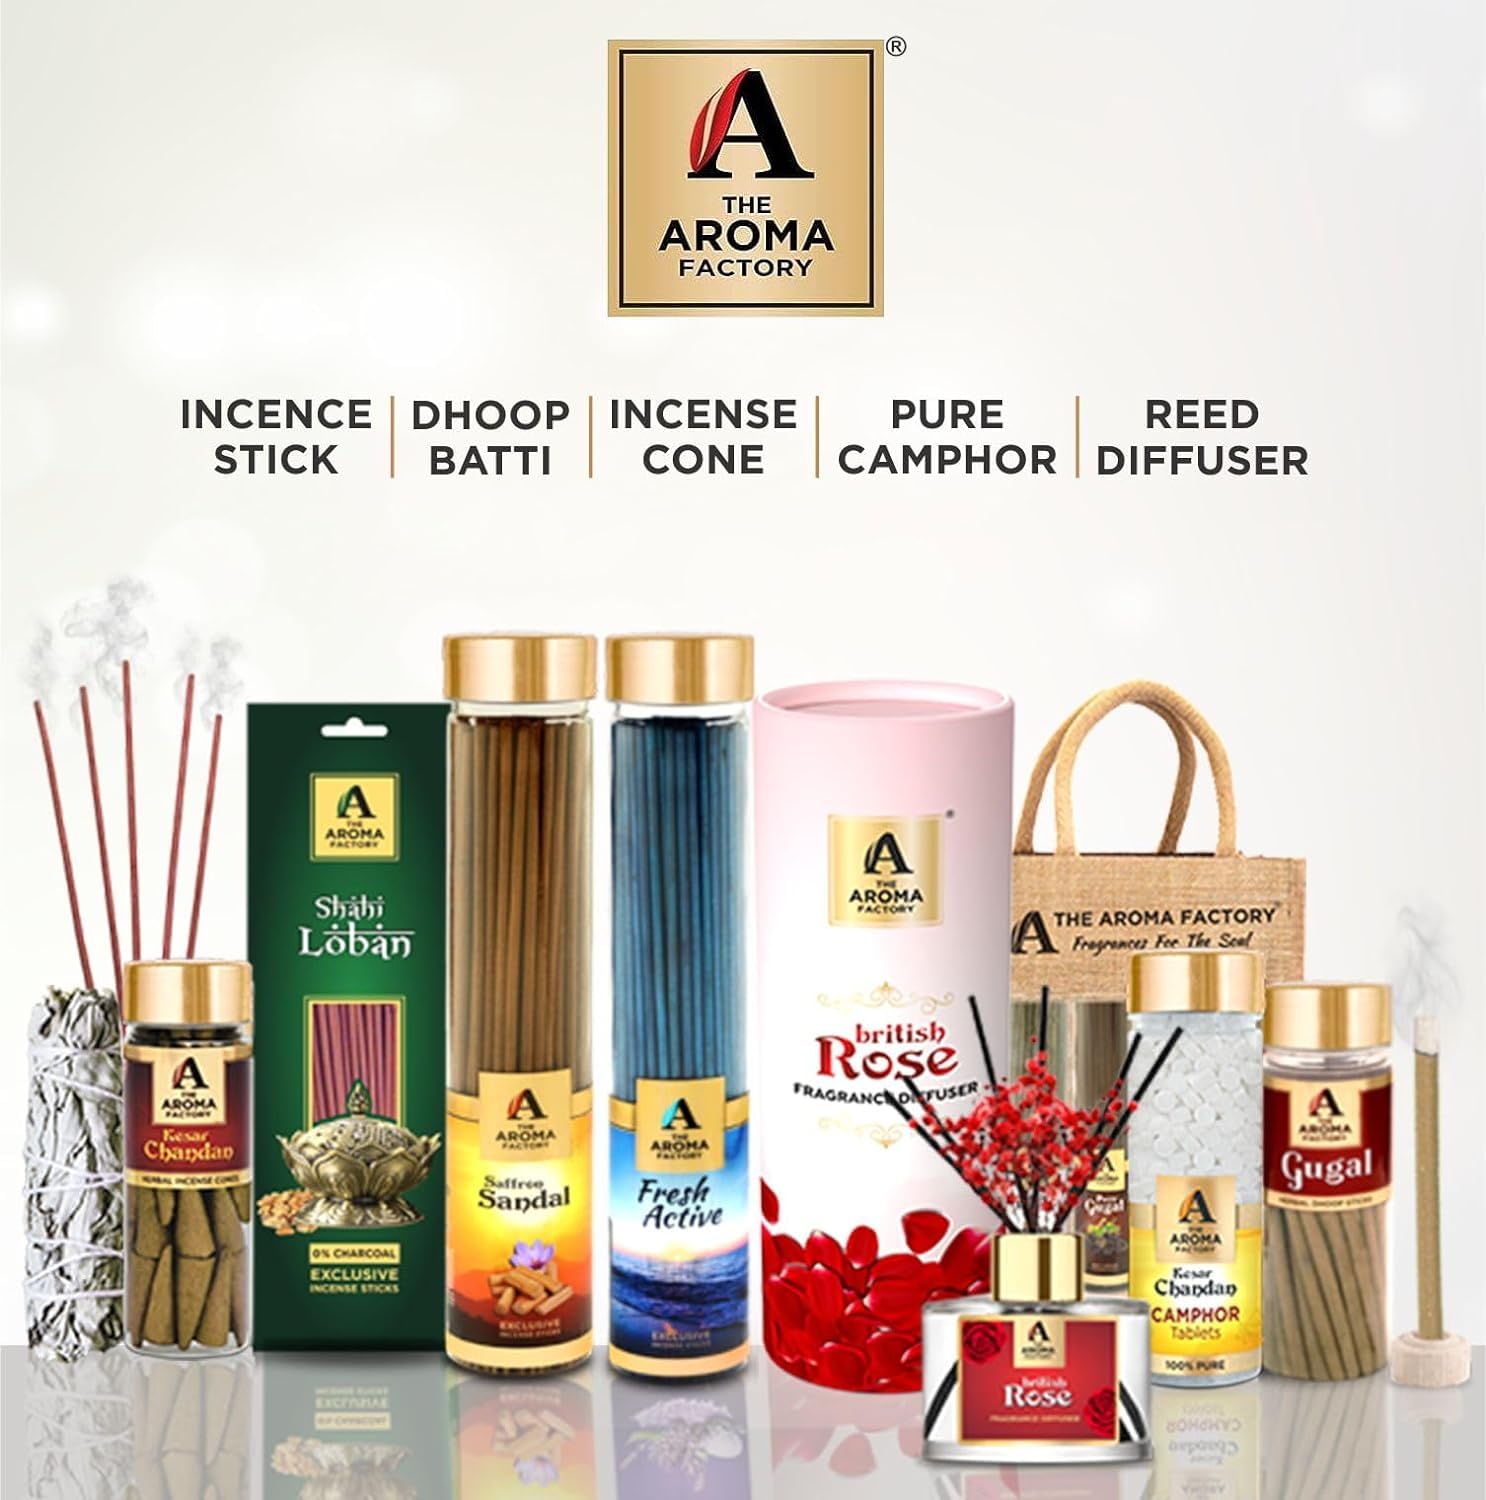 The Aroma Factory Happy Birthday Dad Papa Father Gift with Card (25 Swad Candy, Green Apple Agarbatti Bottle, Rose Dhoopbatti) in Jute Bag